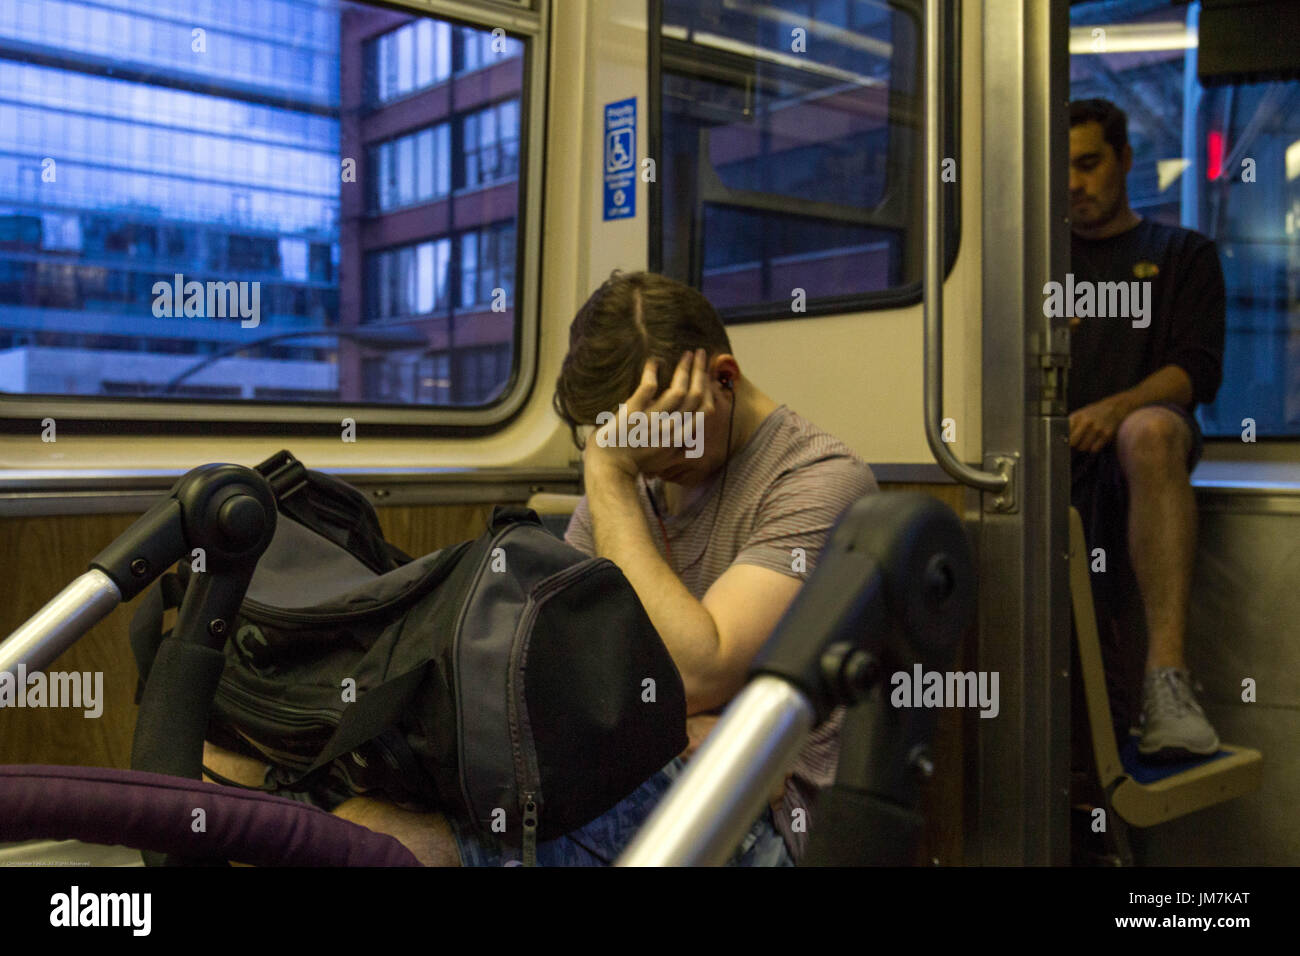 sleeping and waiting on the train. Stock Photo